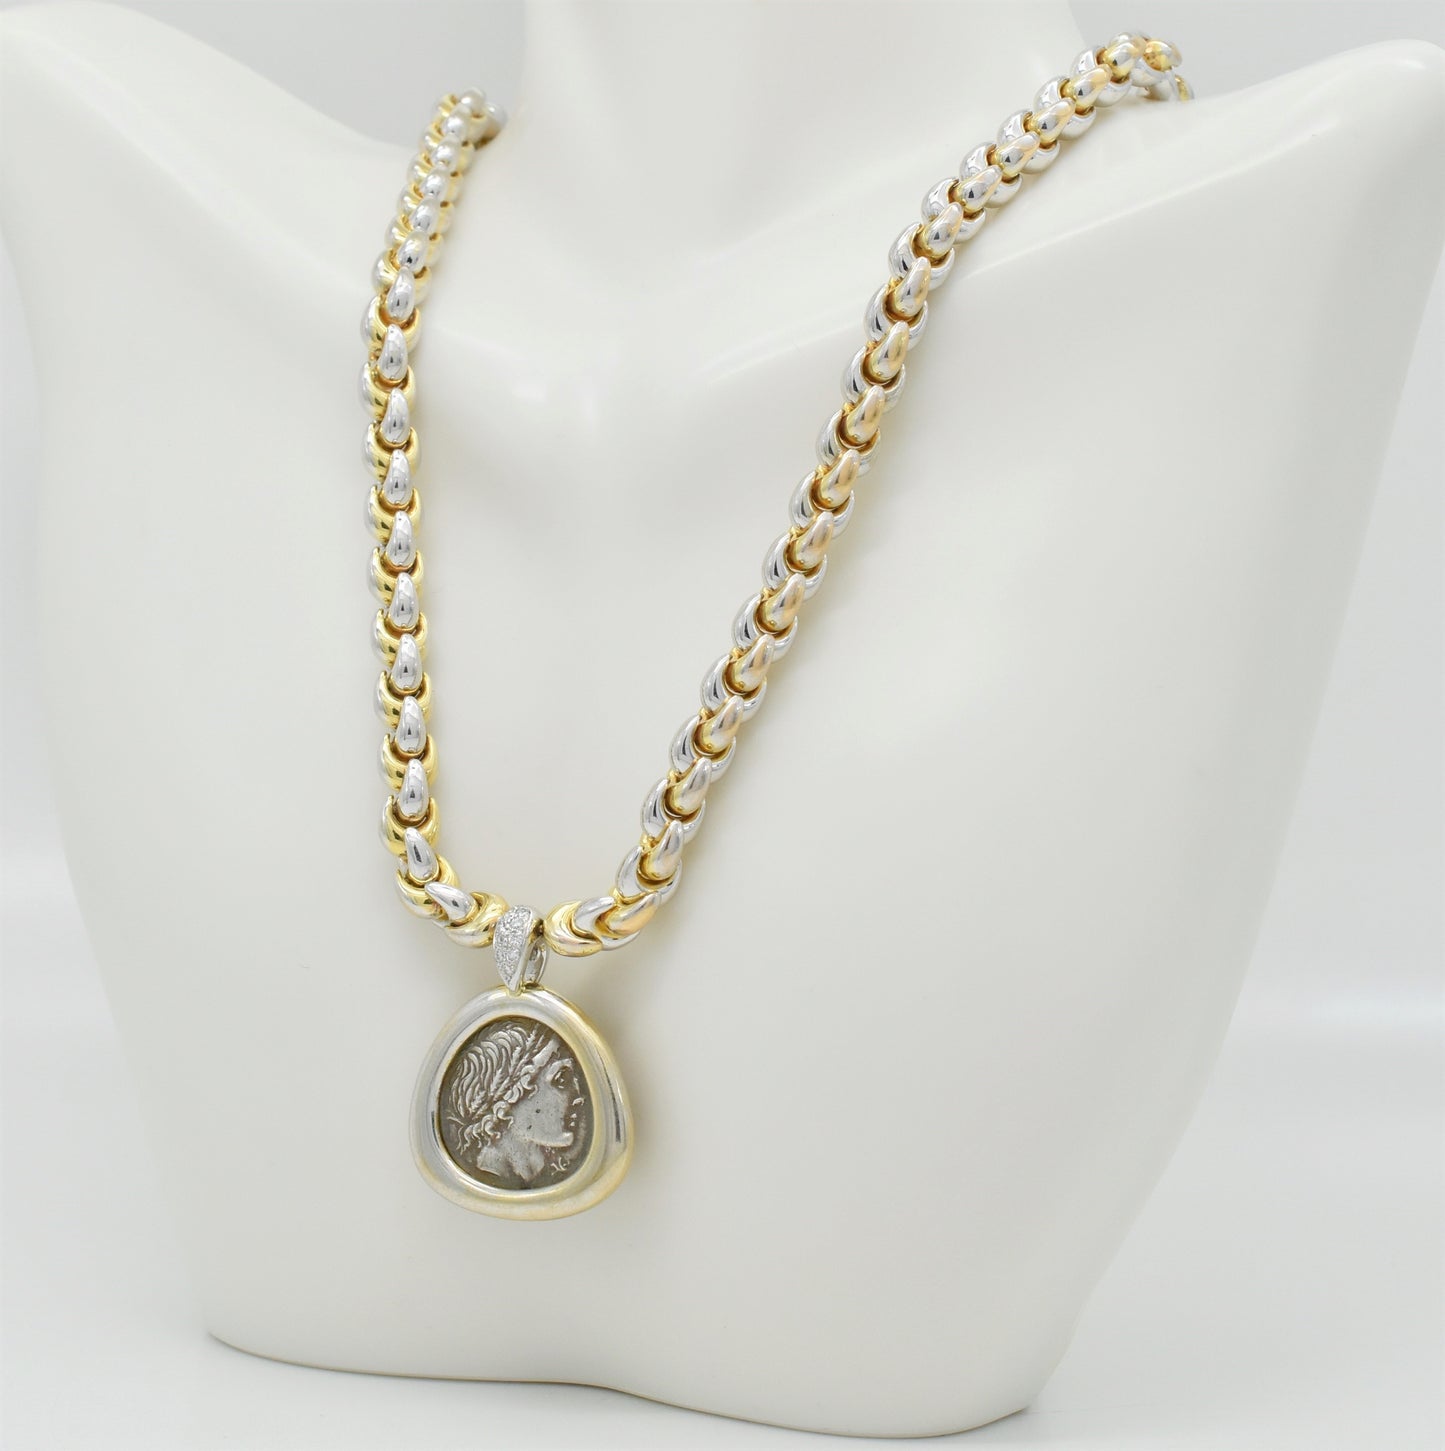 18k Yellow Gold & Platinum Diamond Roman Coin Necklace, 16.5 inches - 53.0g